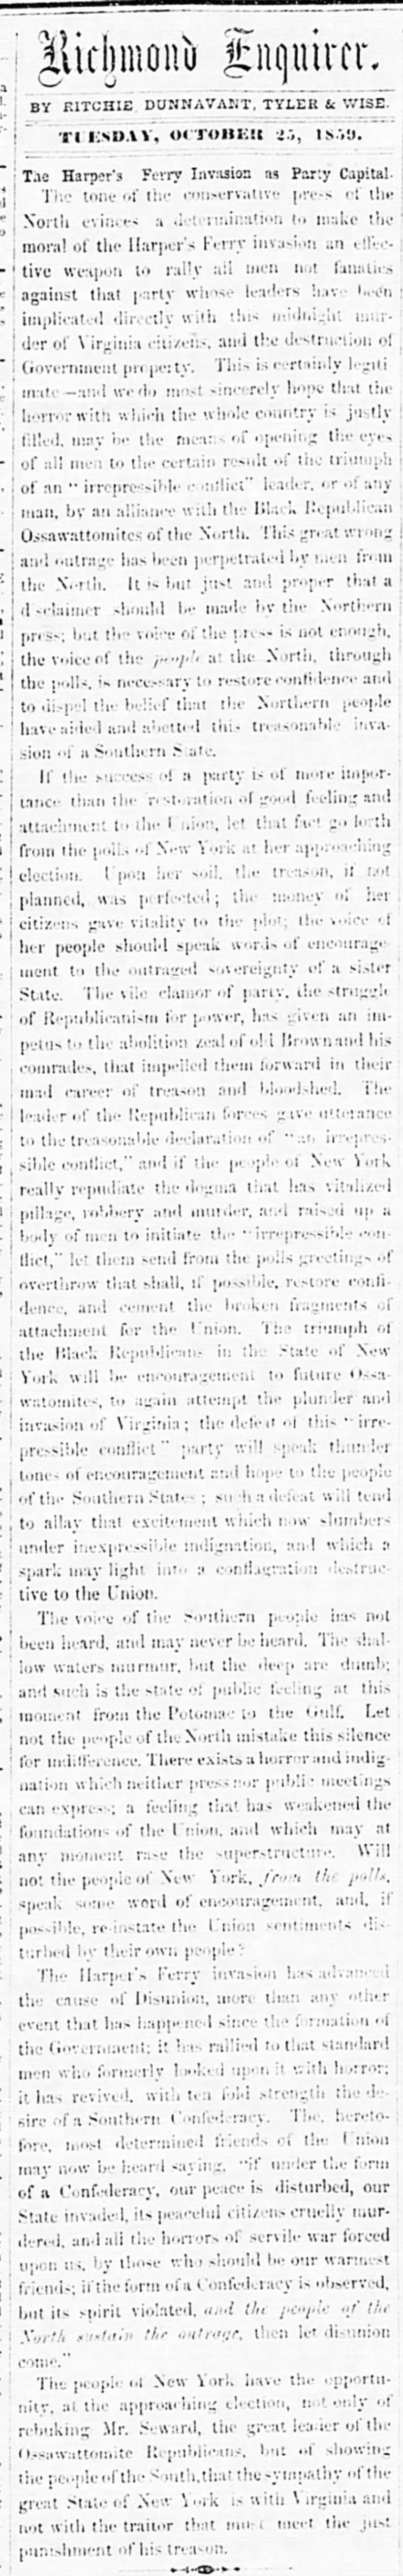 Editorial on political implications of Harpers Ferry raid